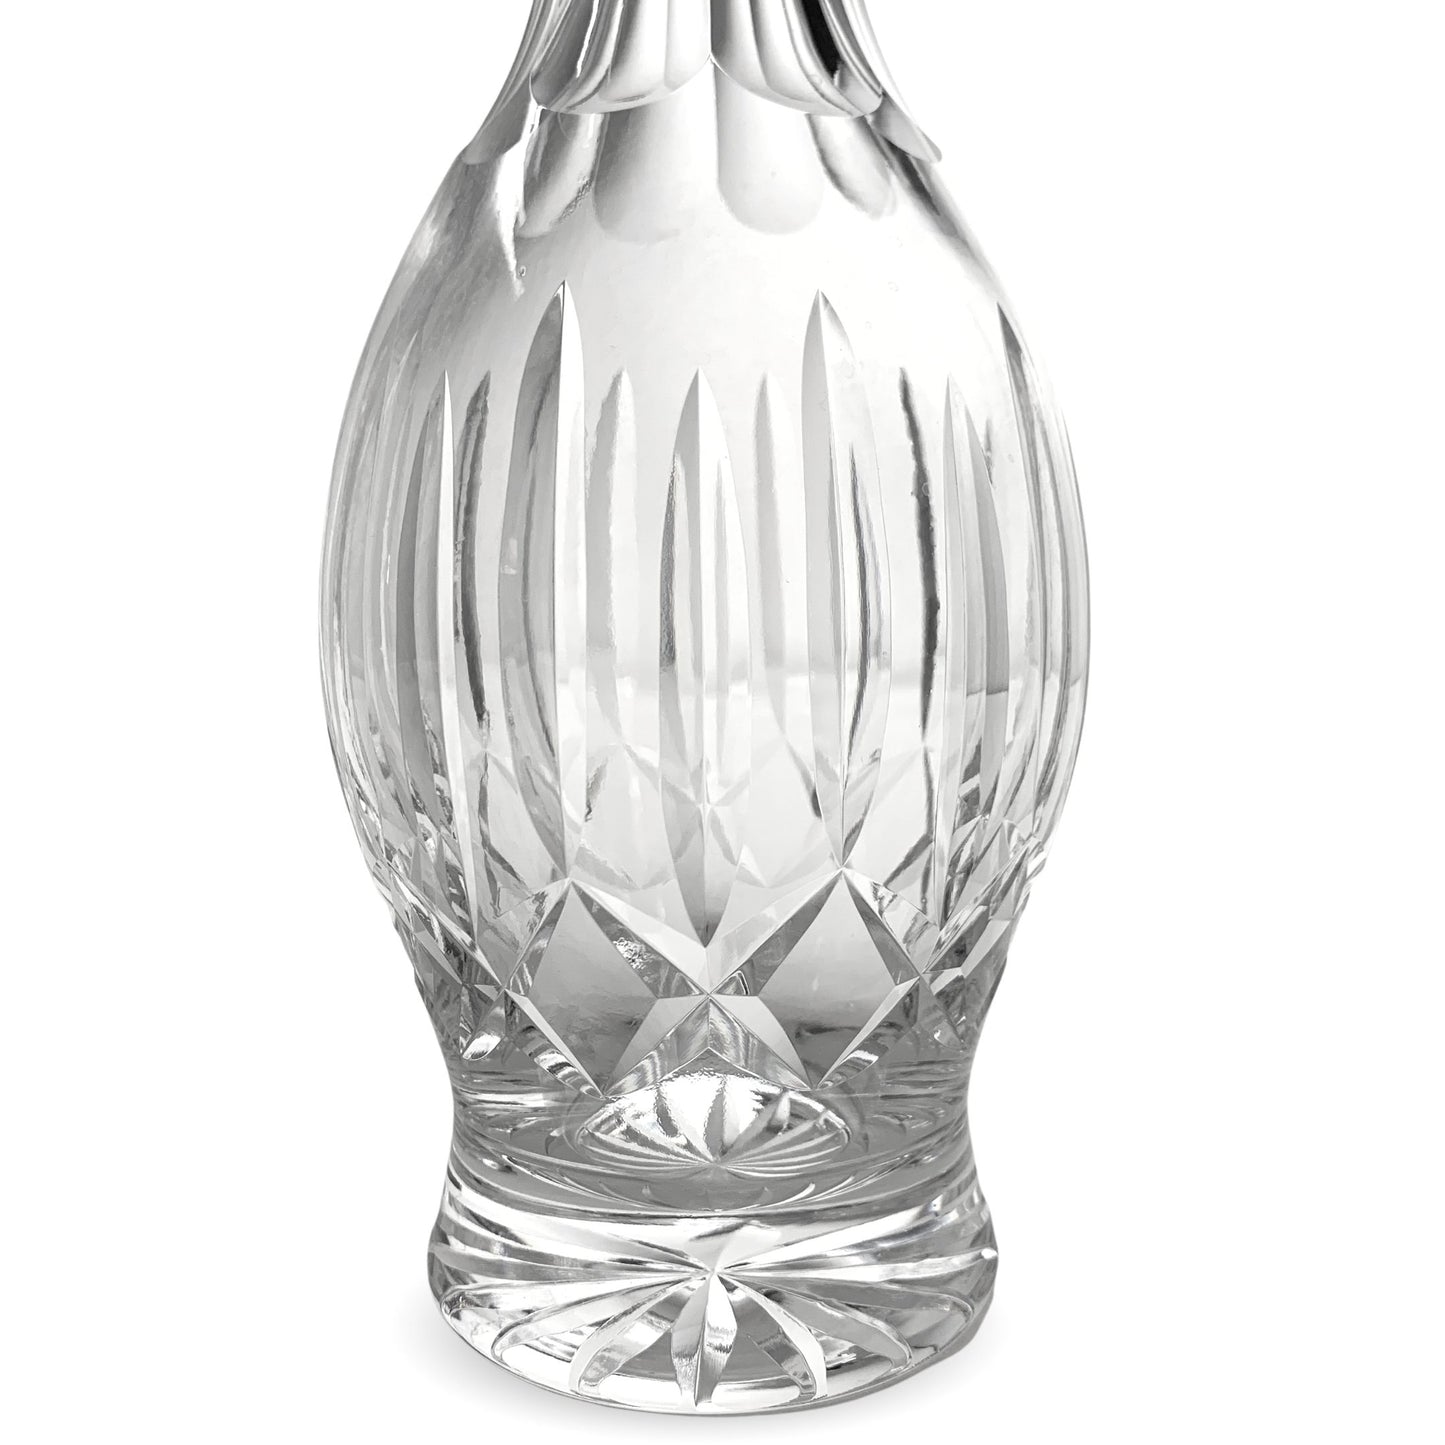 Waterford Kildare 13" Crystal Decanter